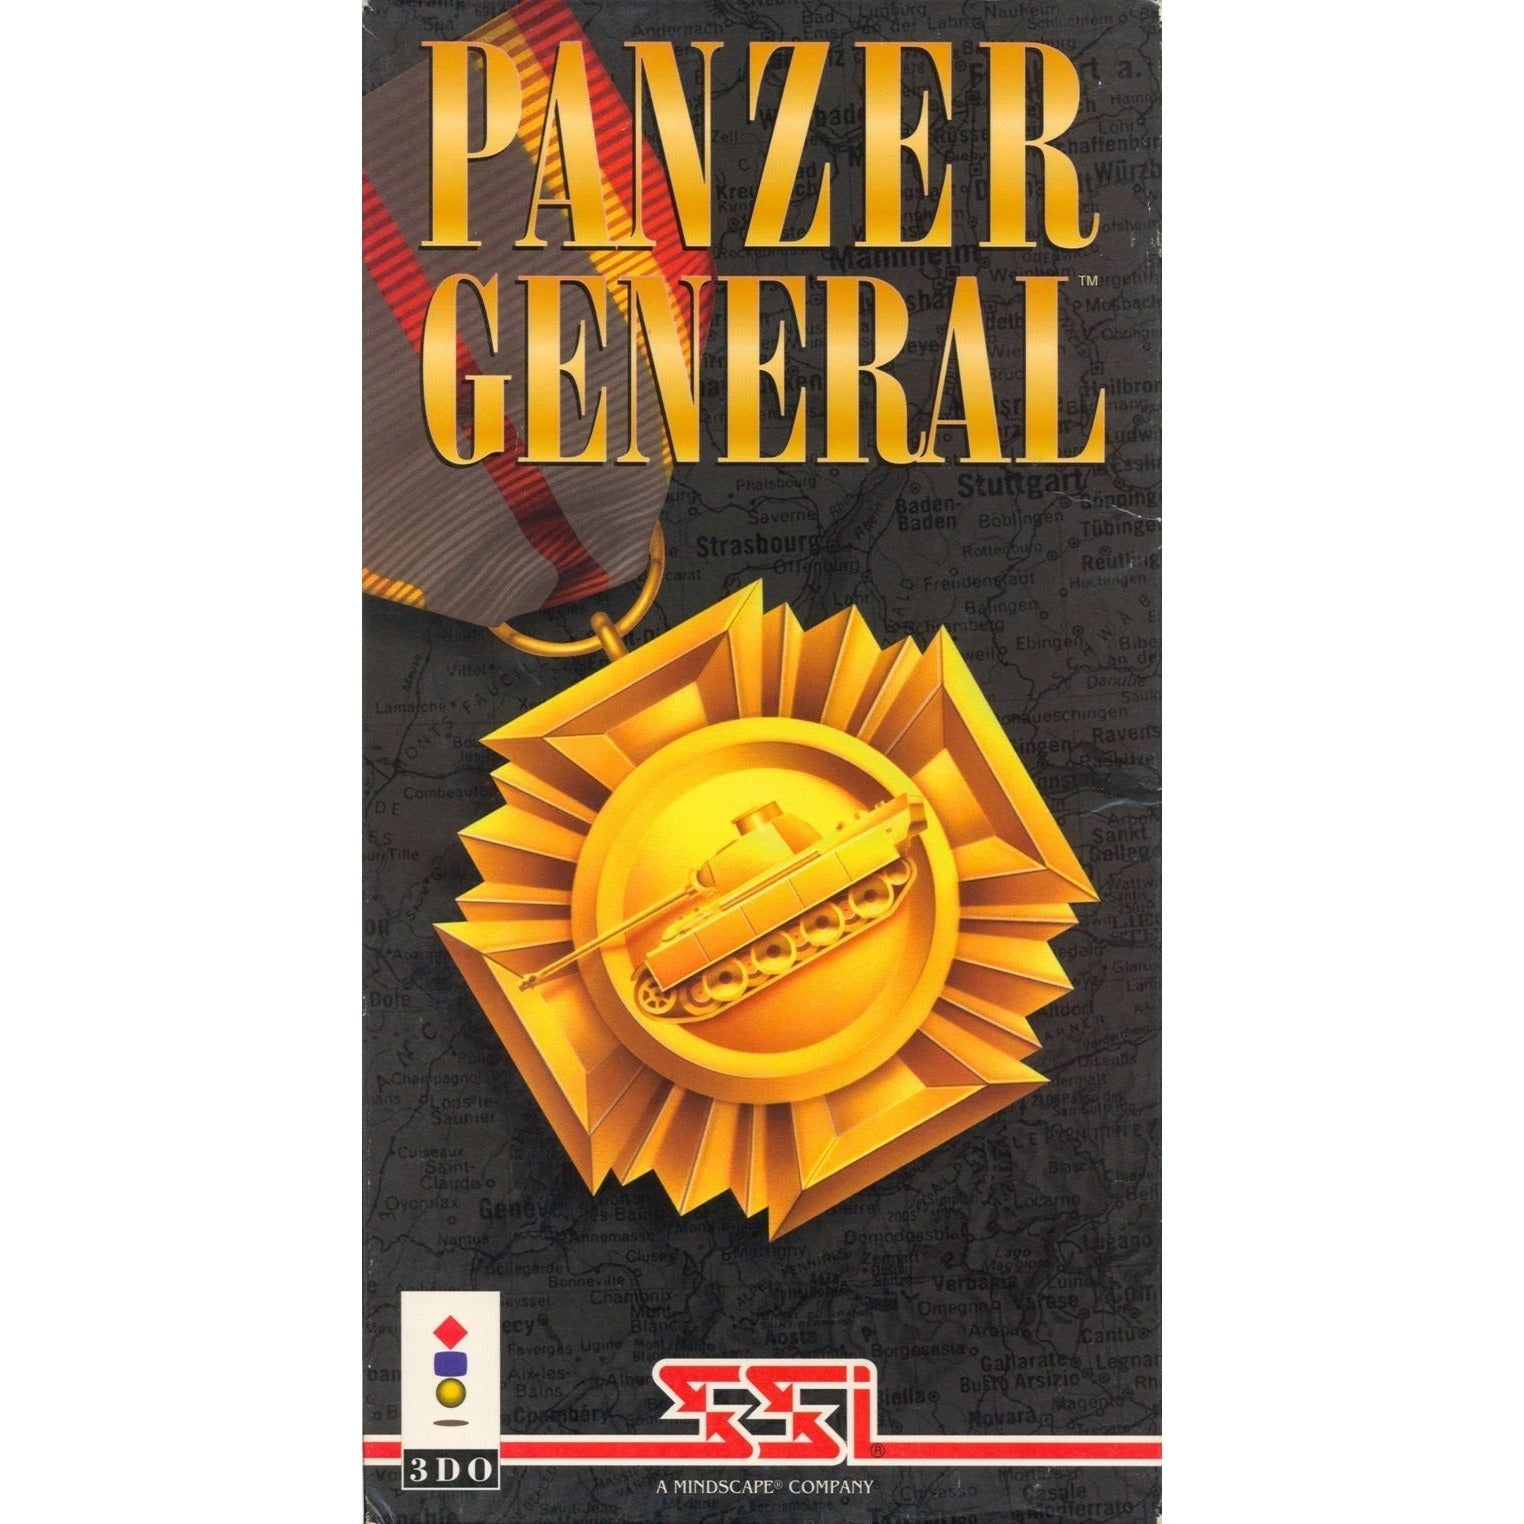 3DO - Panzer General (Printed Cover Art)